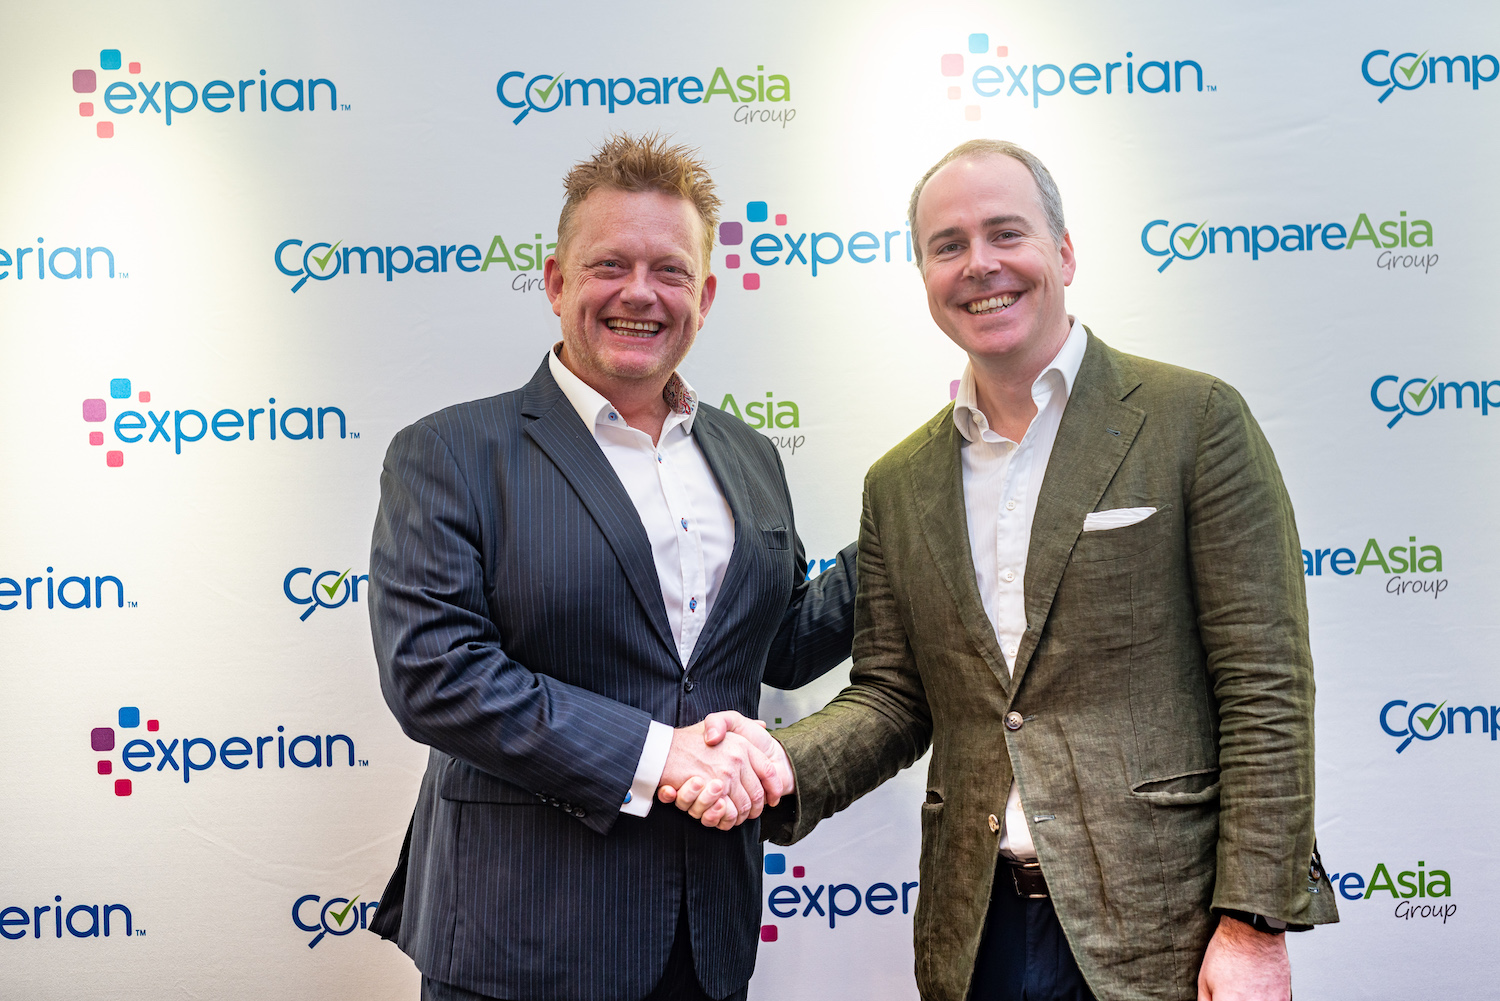 CompareAsiaGroup raises USD 20 million from first close of Series B1 led by Experian